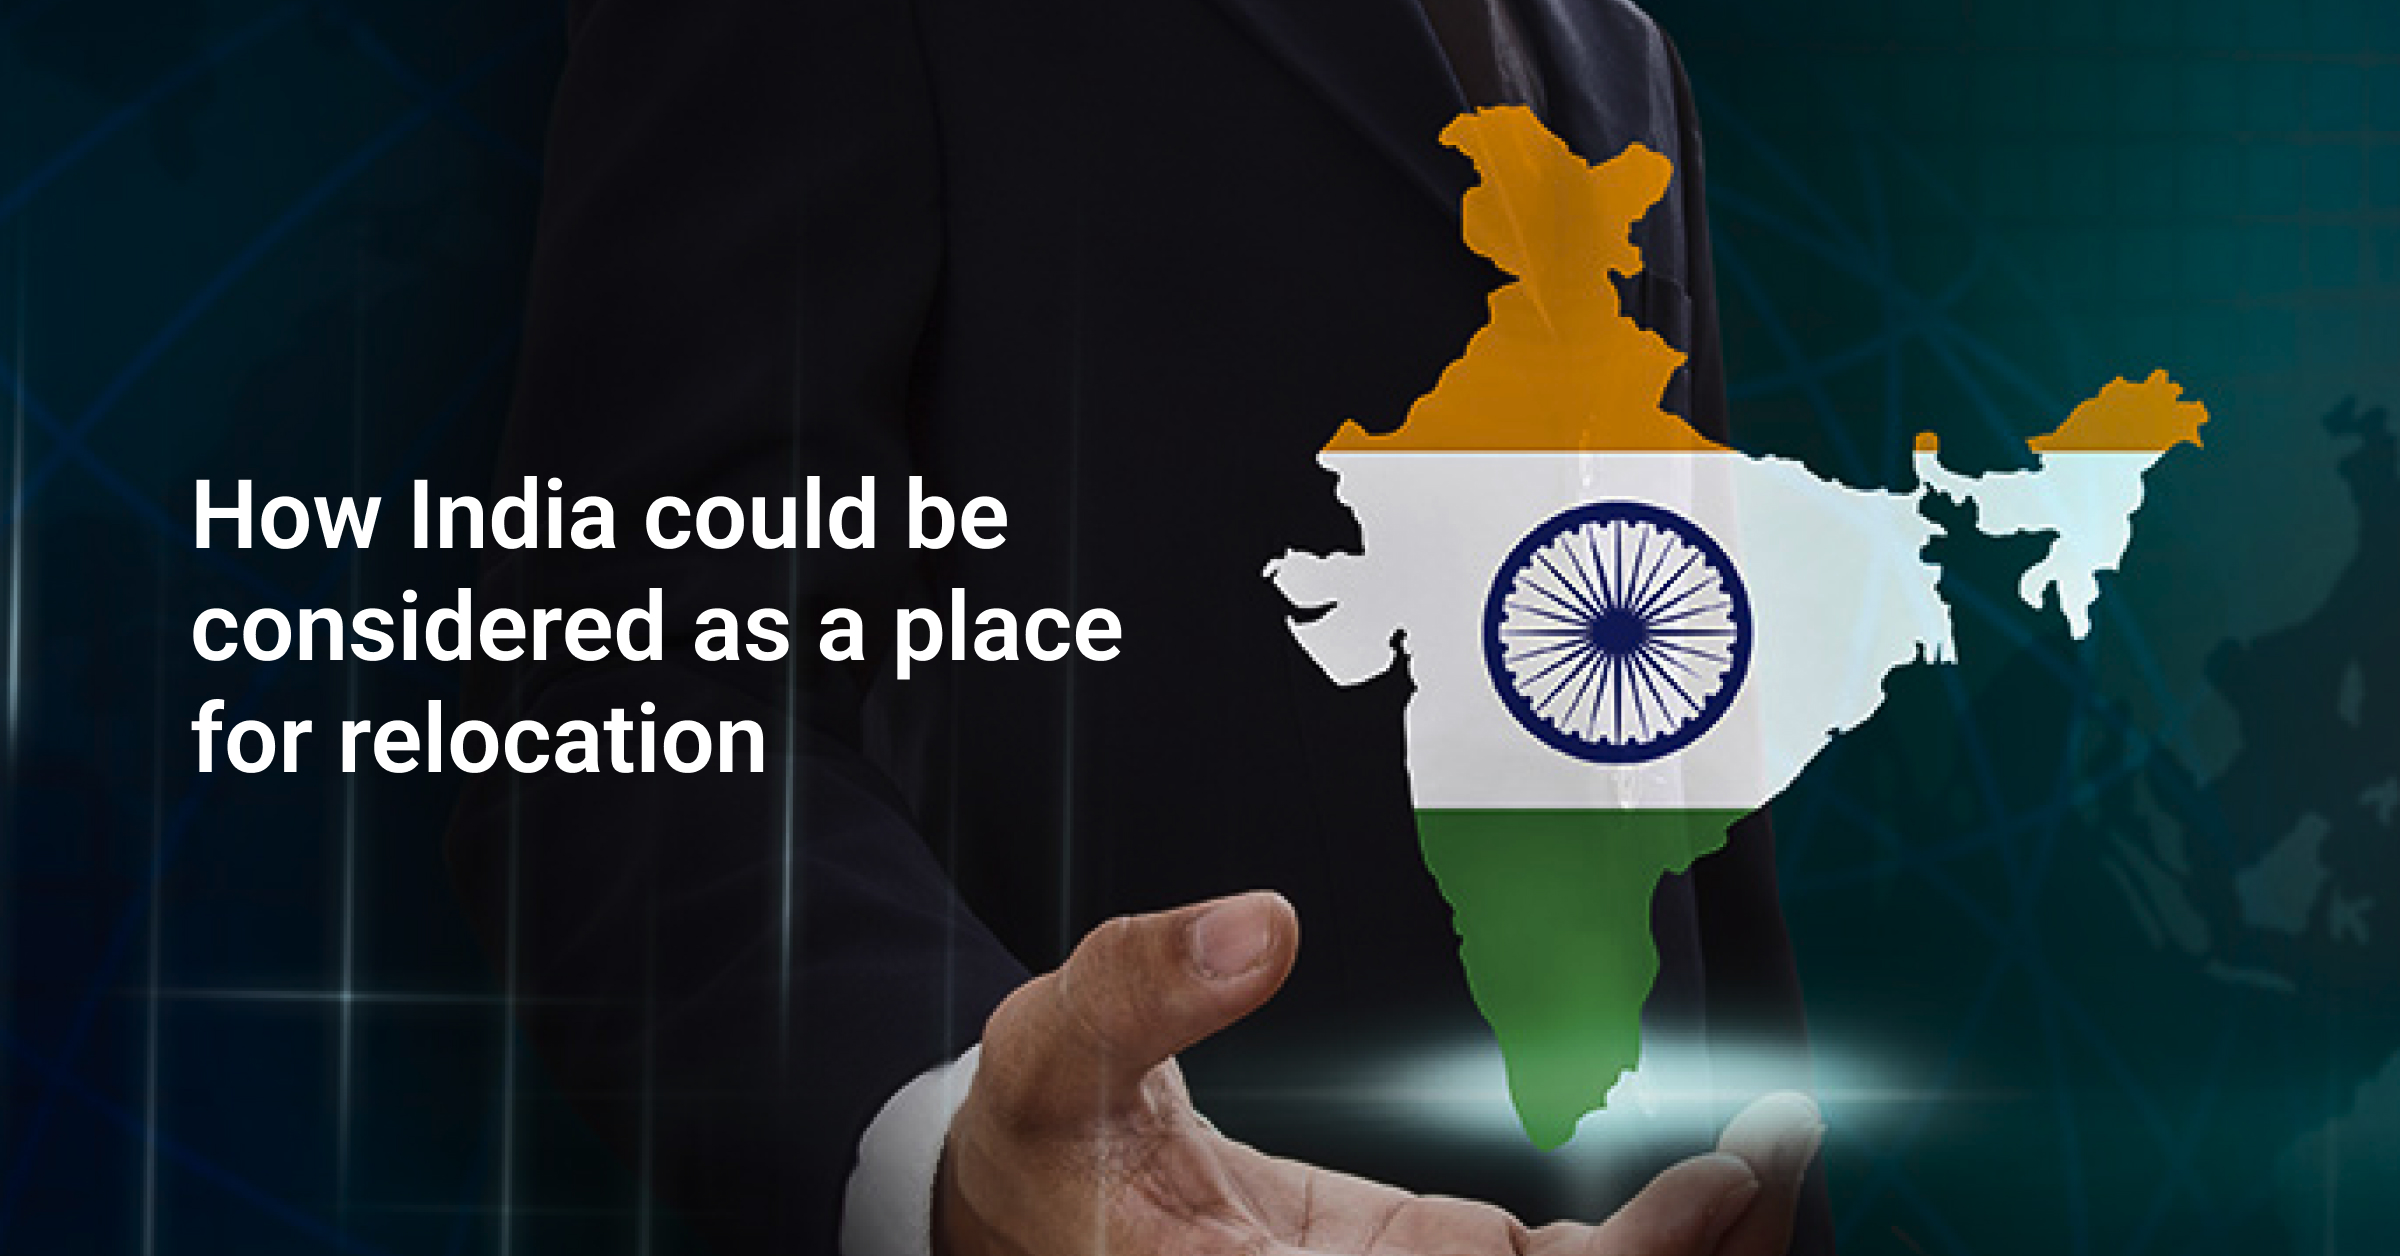 How India could be considered as a place for relocation